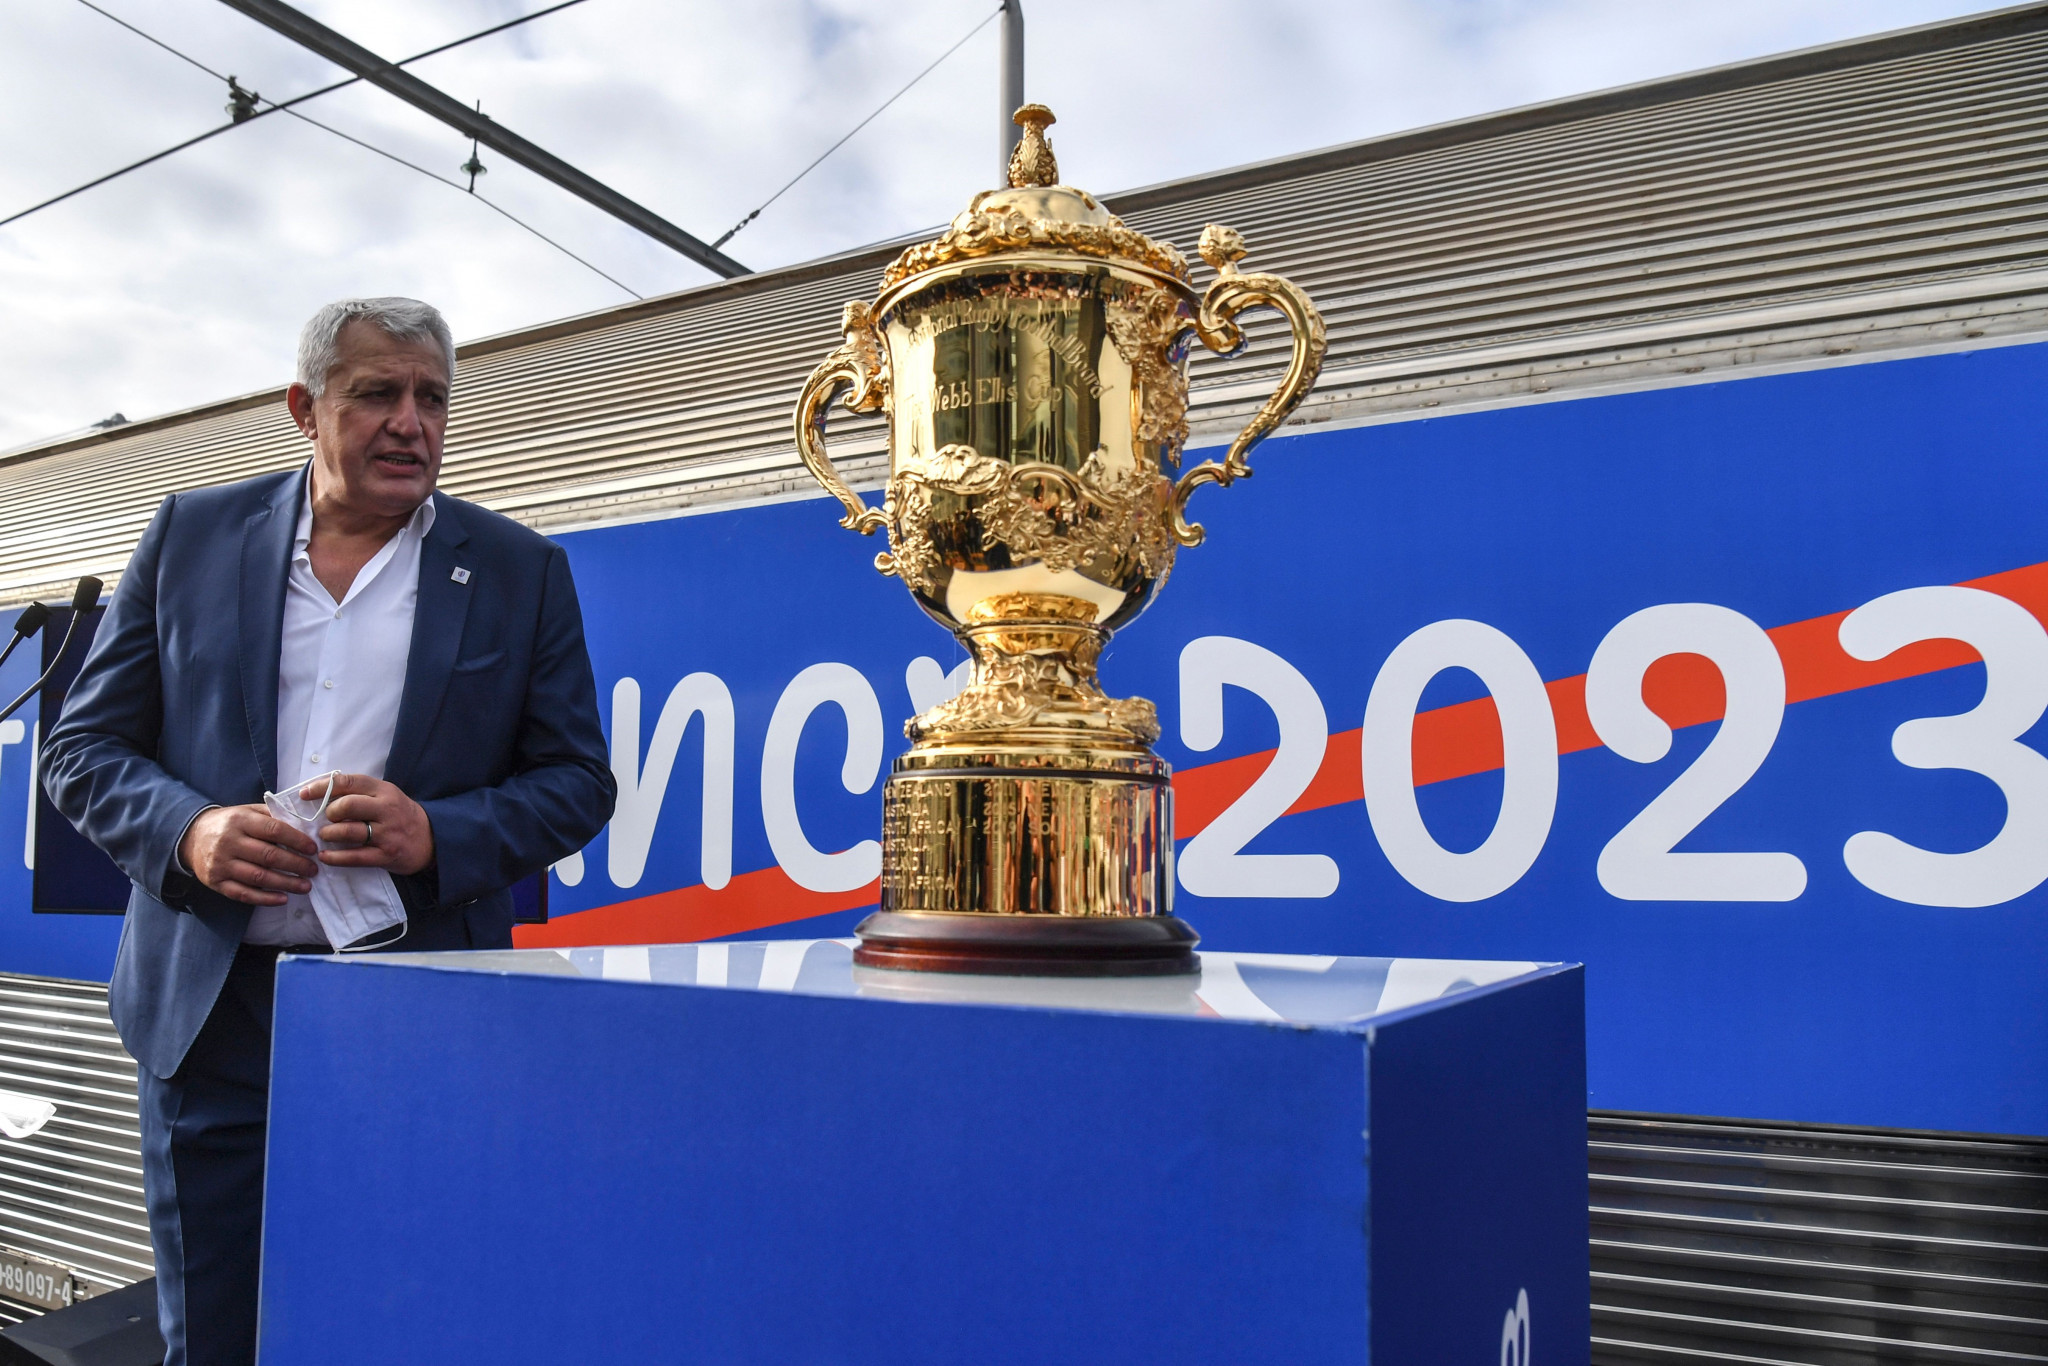 Claude Atcher was axed as chief executive of France 2023 Rugby World Cup in October last year and remains under investigation by Paris prosecutors ©Getty Images